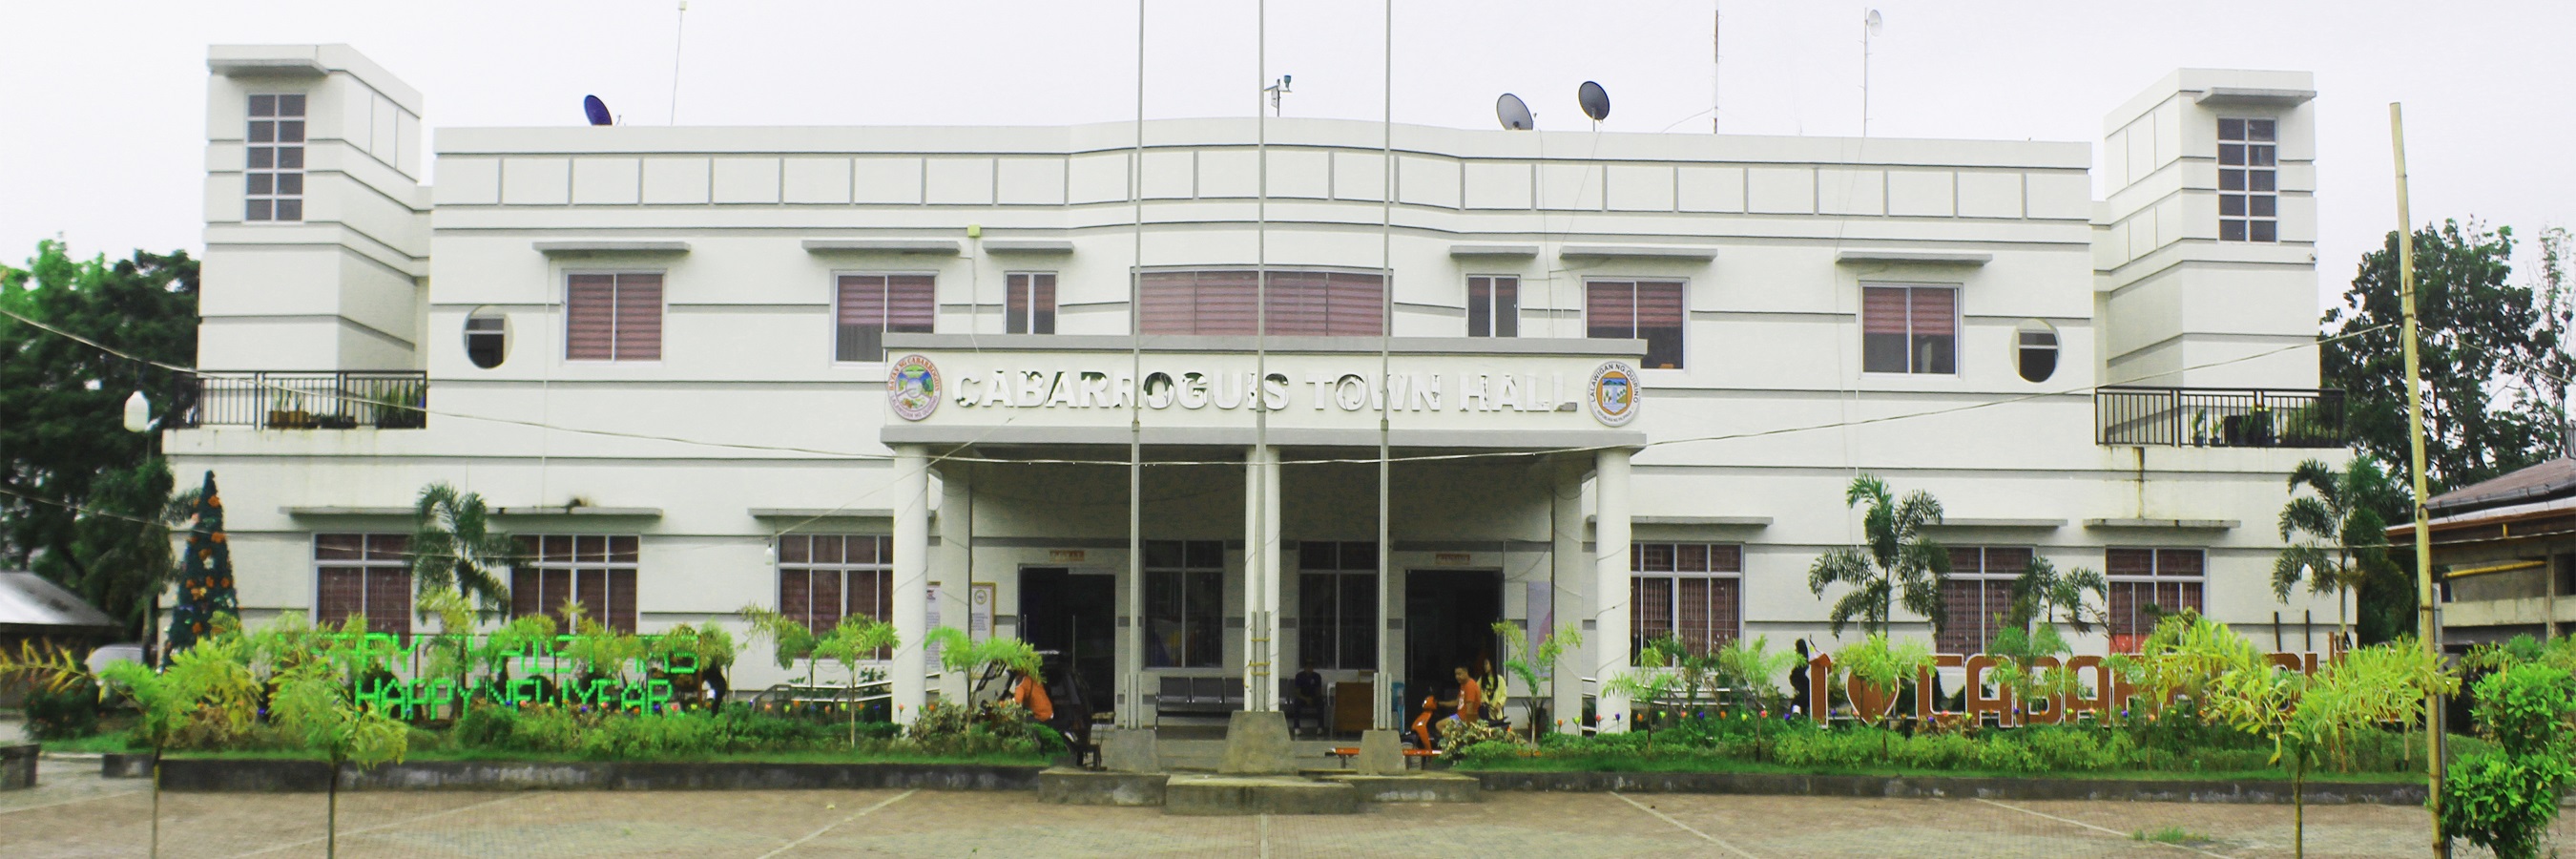 The New Municipal Hall Building